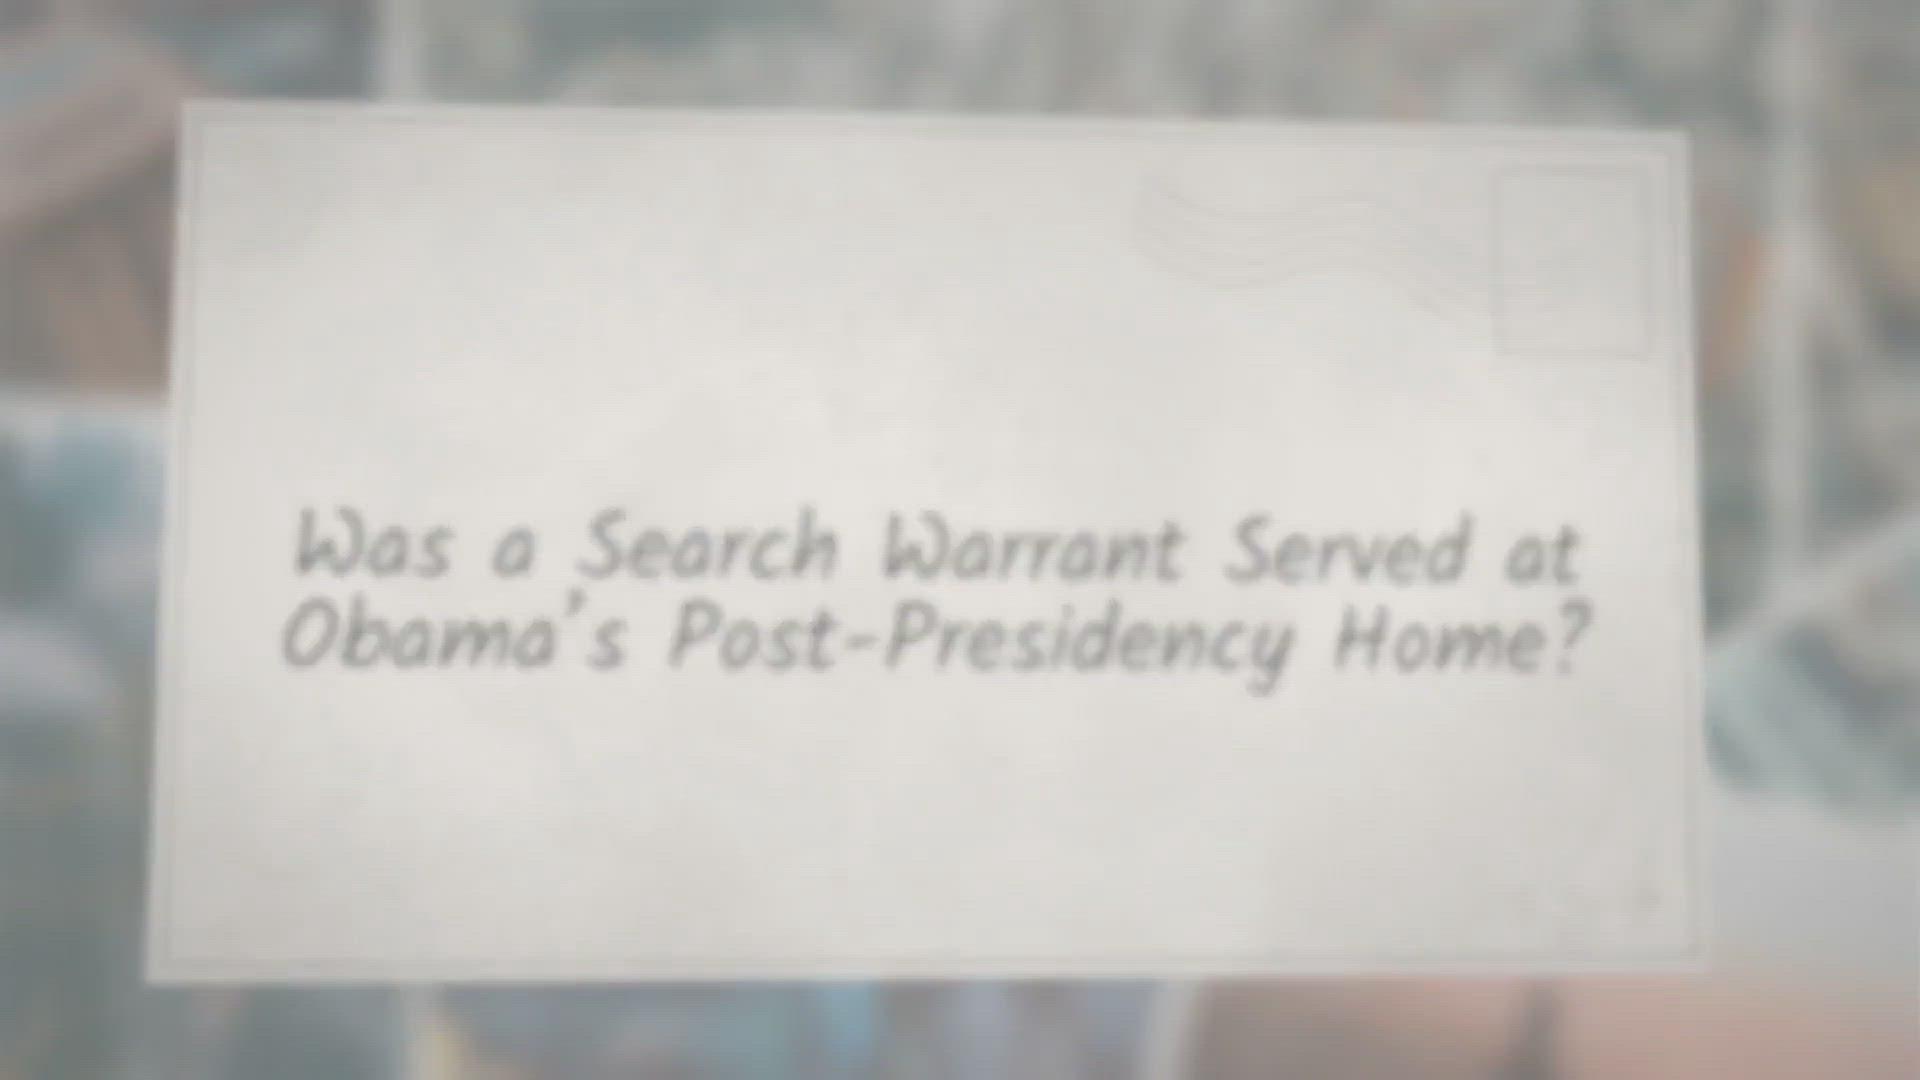 'Video thumbnail for Was a Search Warrant Served at Obama’s Post-Presidency Home?'